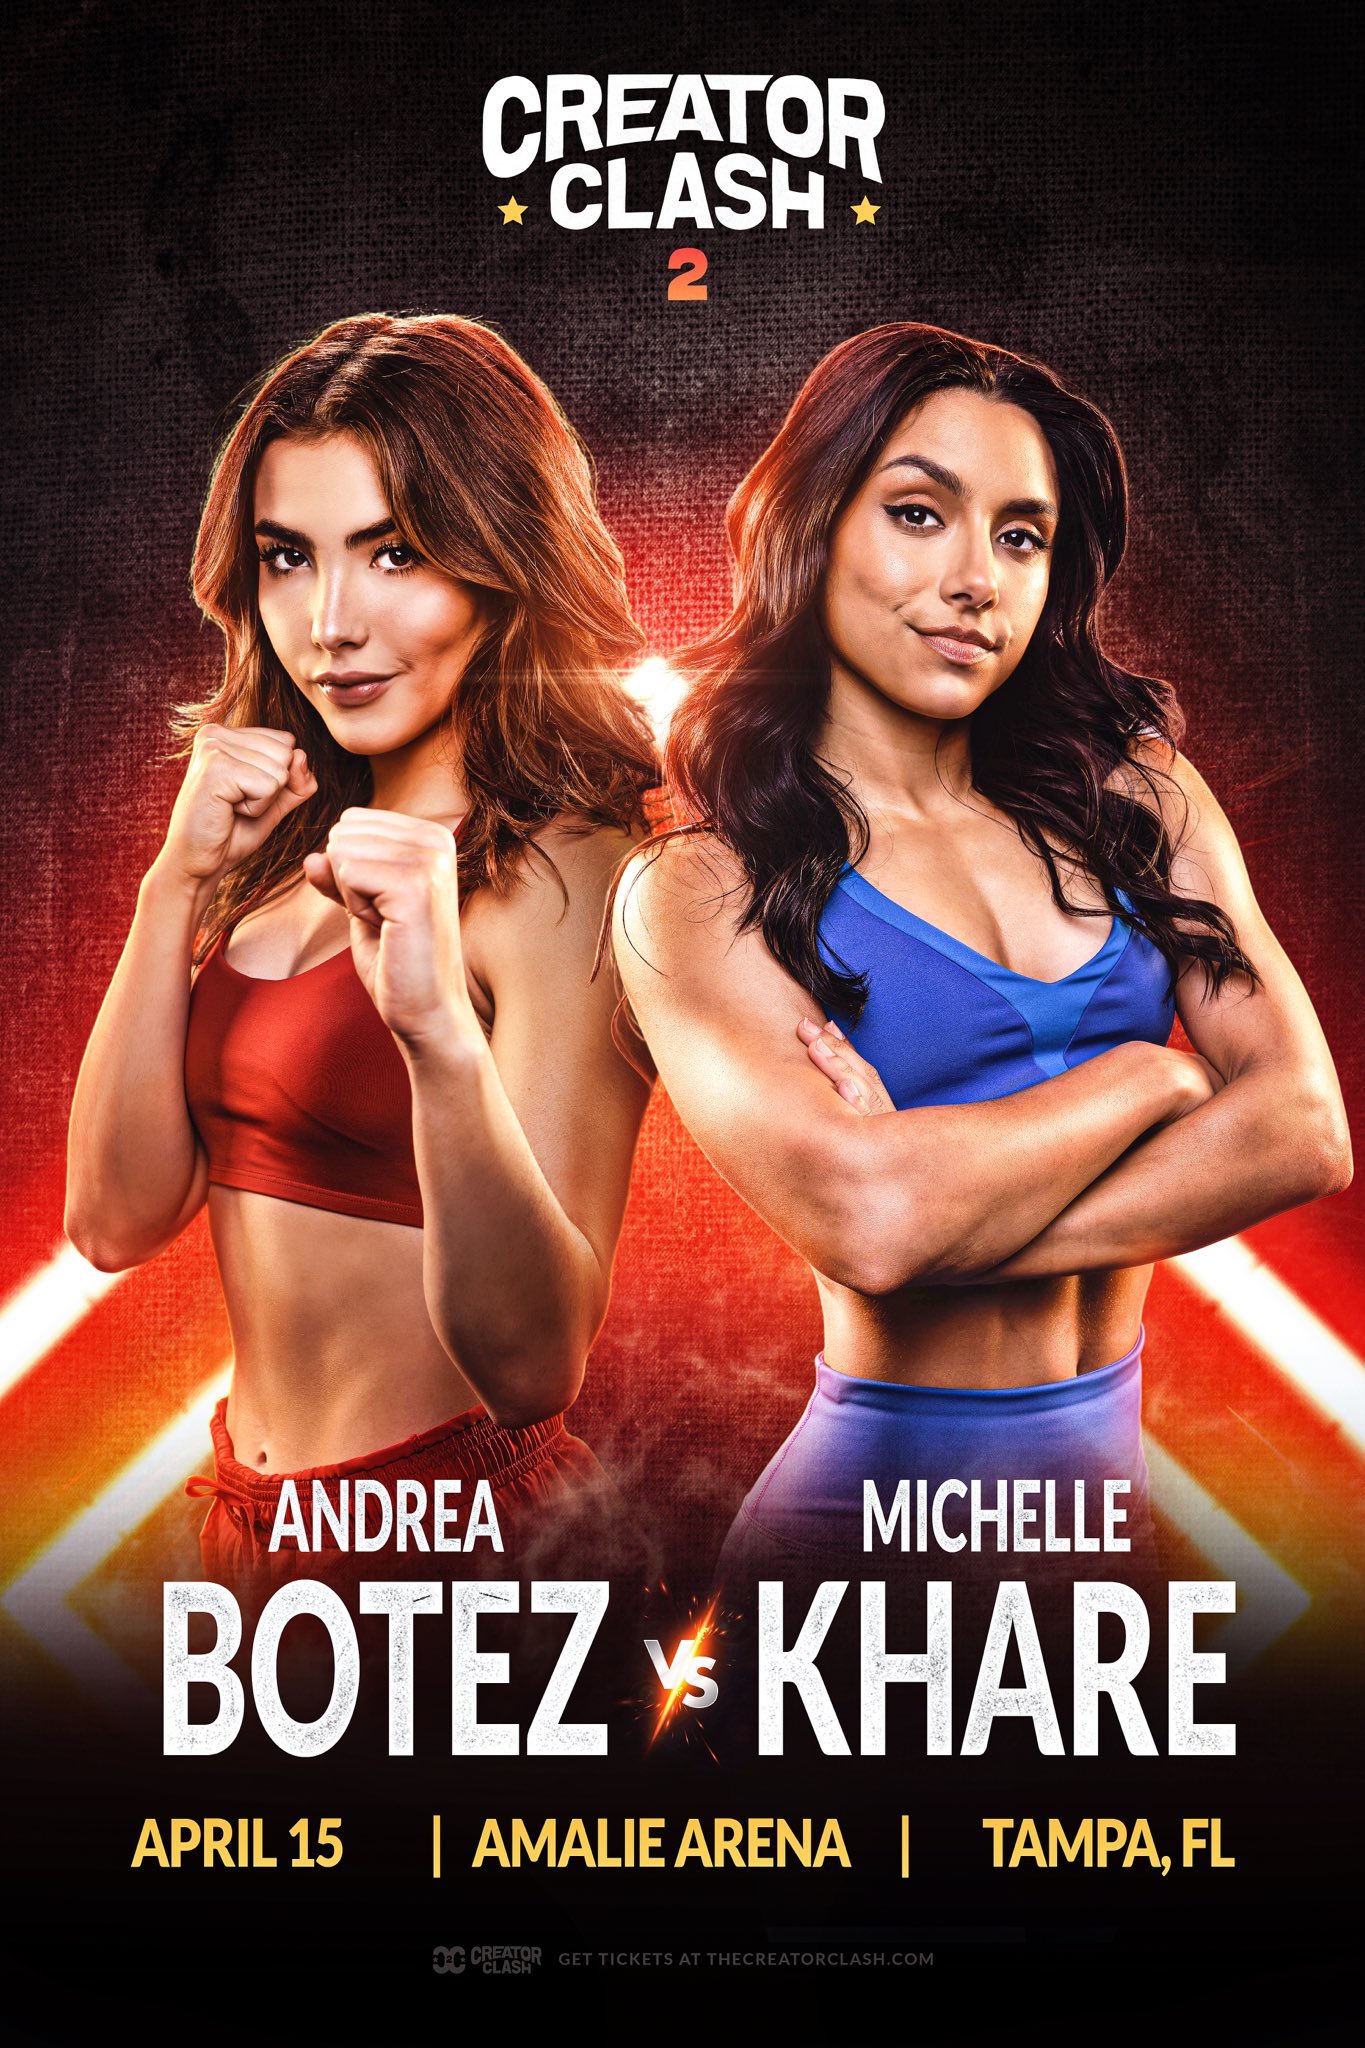 Andrea Botez says she will never fight again following loss to Michelle  Khare